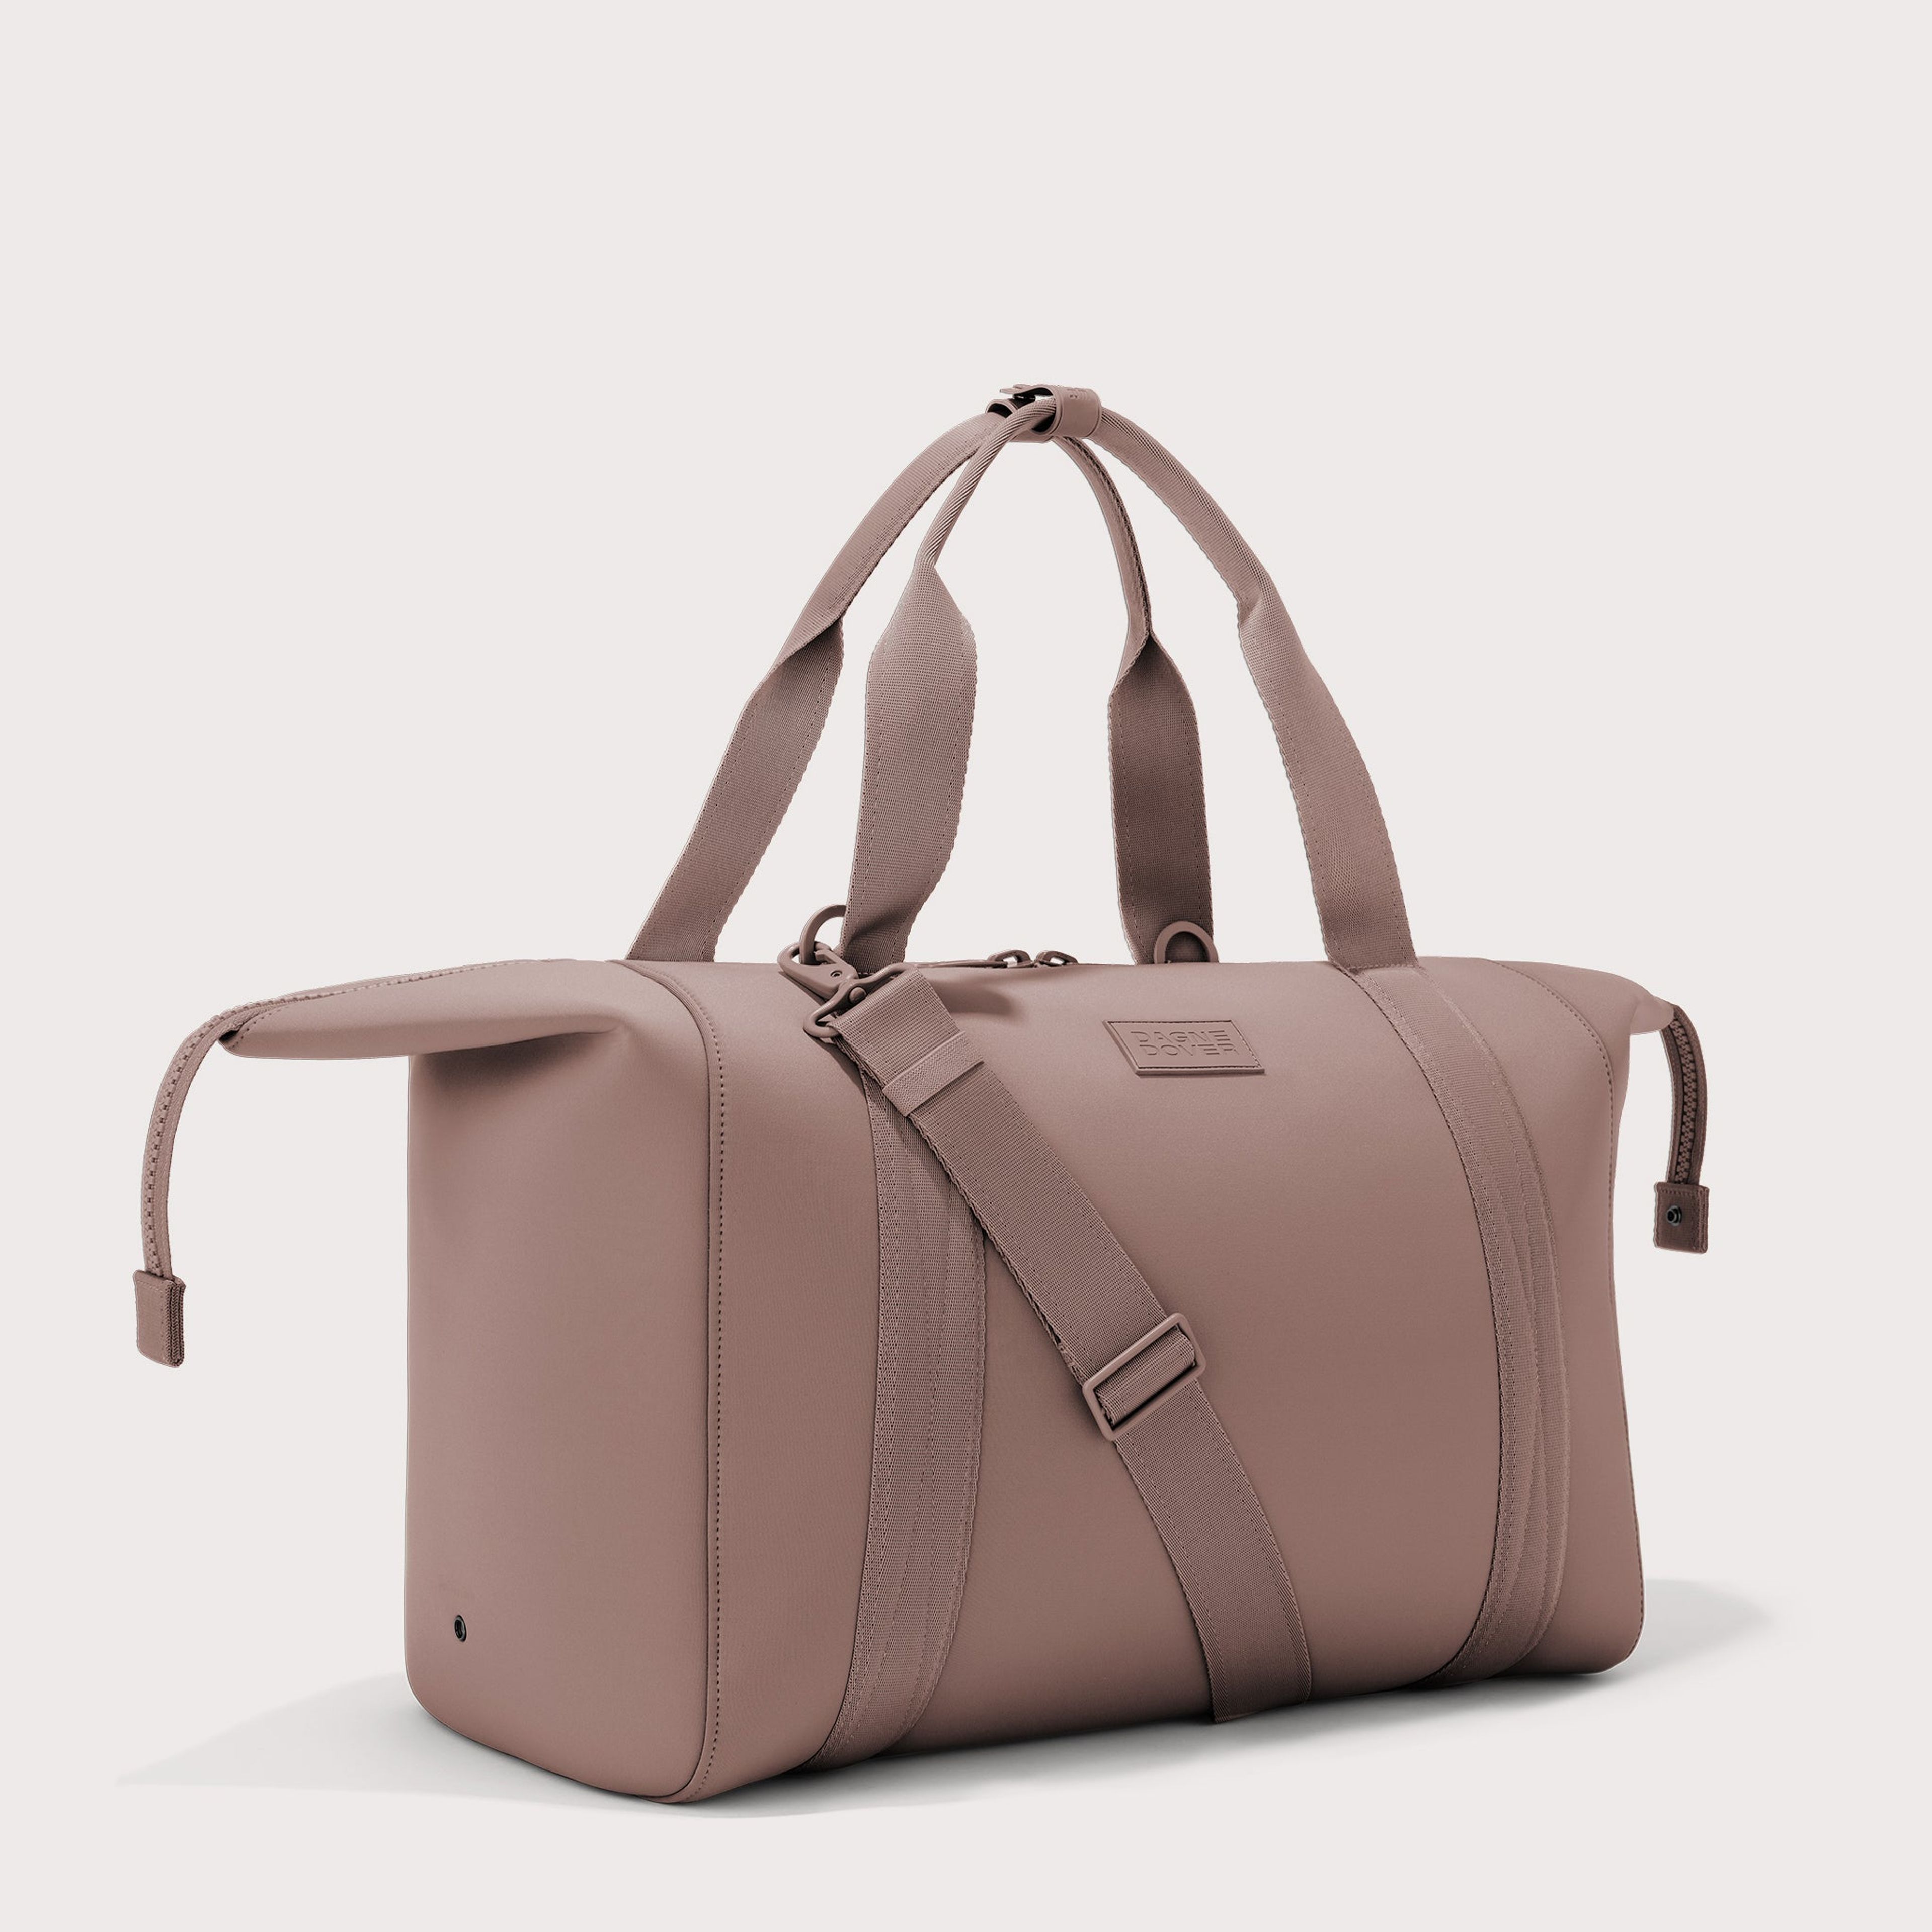 Landon Carryall in Dune, Extra Large